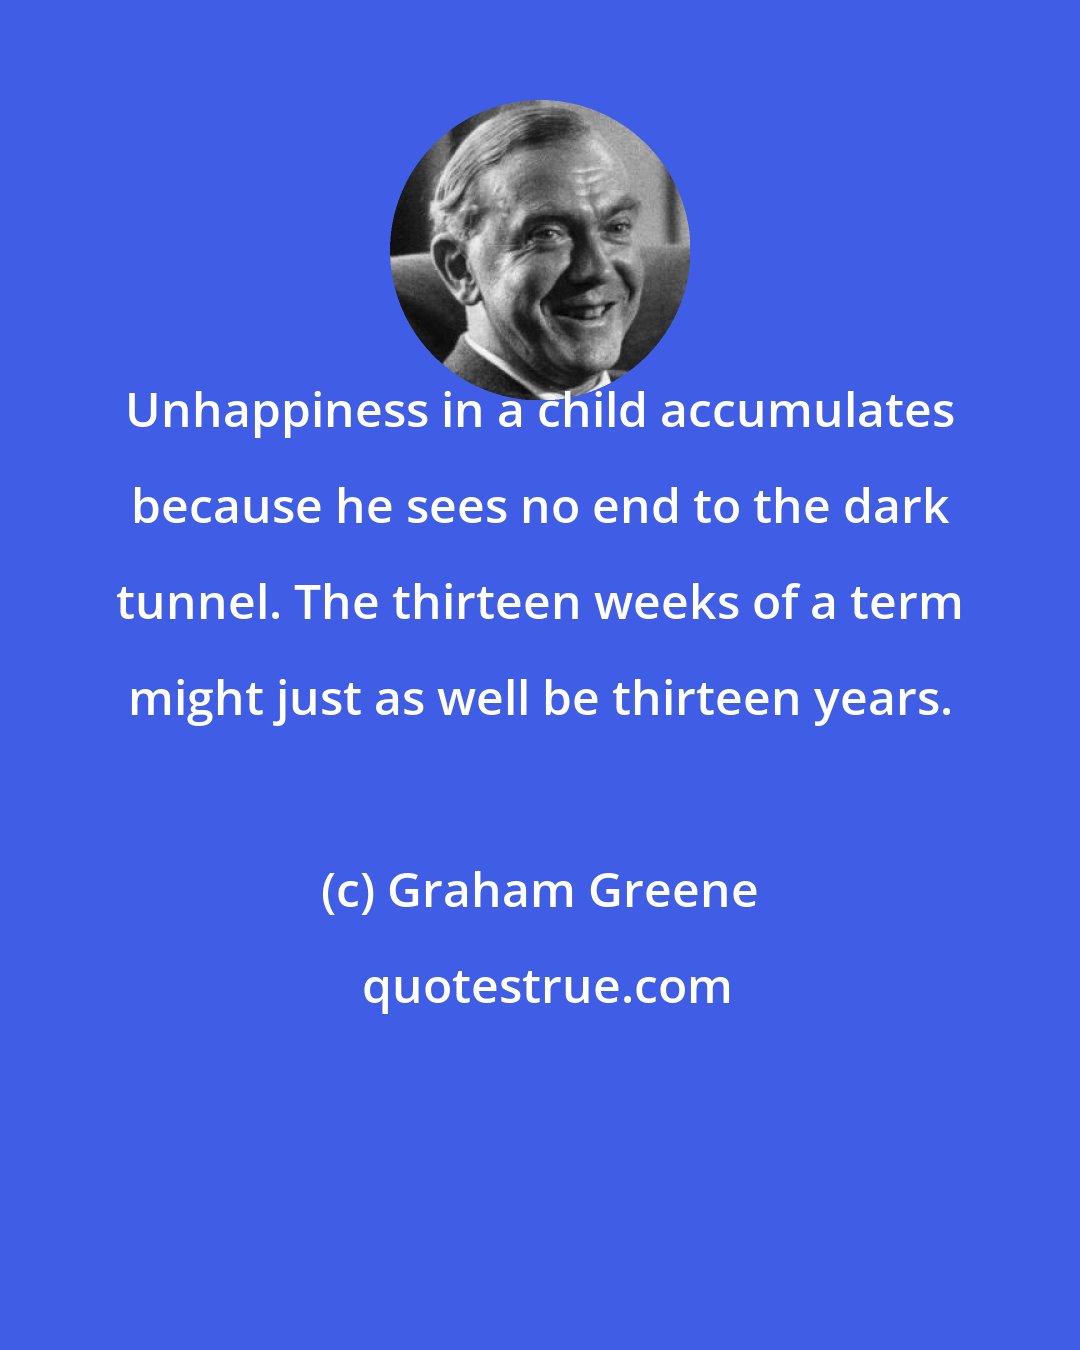 Graham Greene: Unhappiness in a child accumulates because he sees no end to the dark tunnel. The thirteen weeks of a term might just as well be thirteen years.